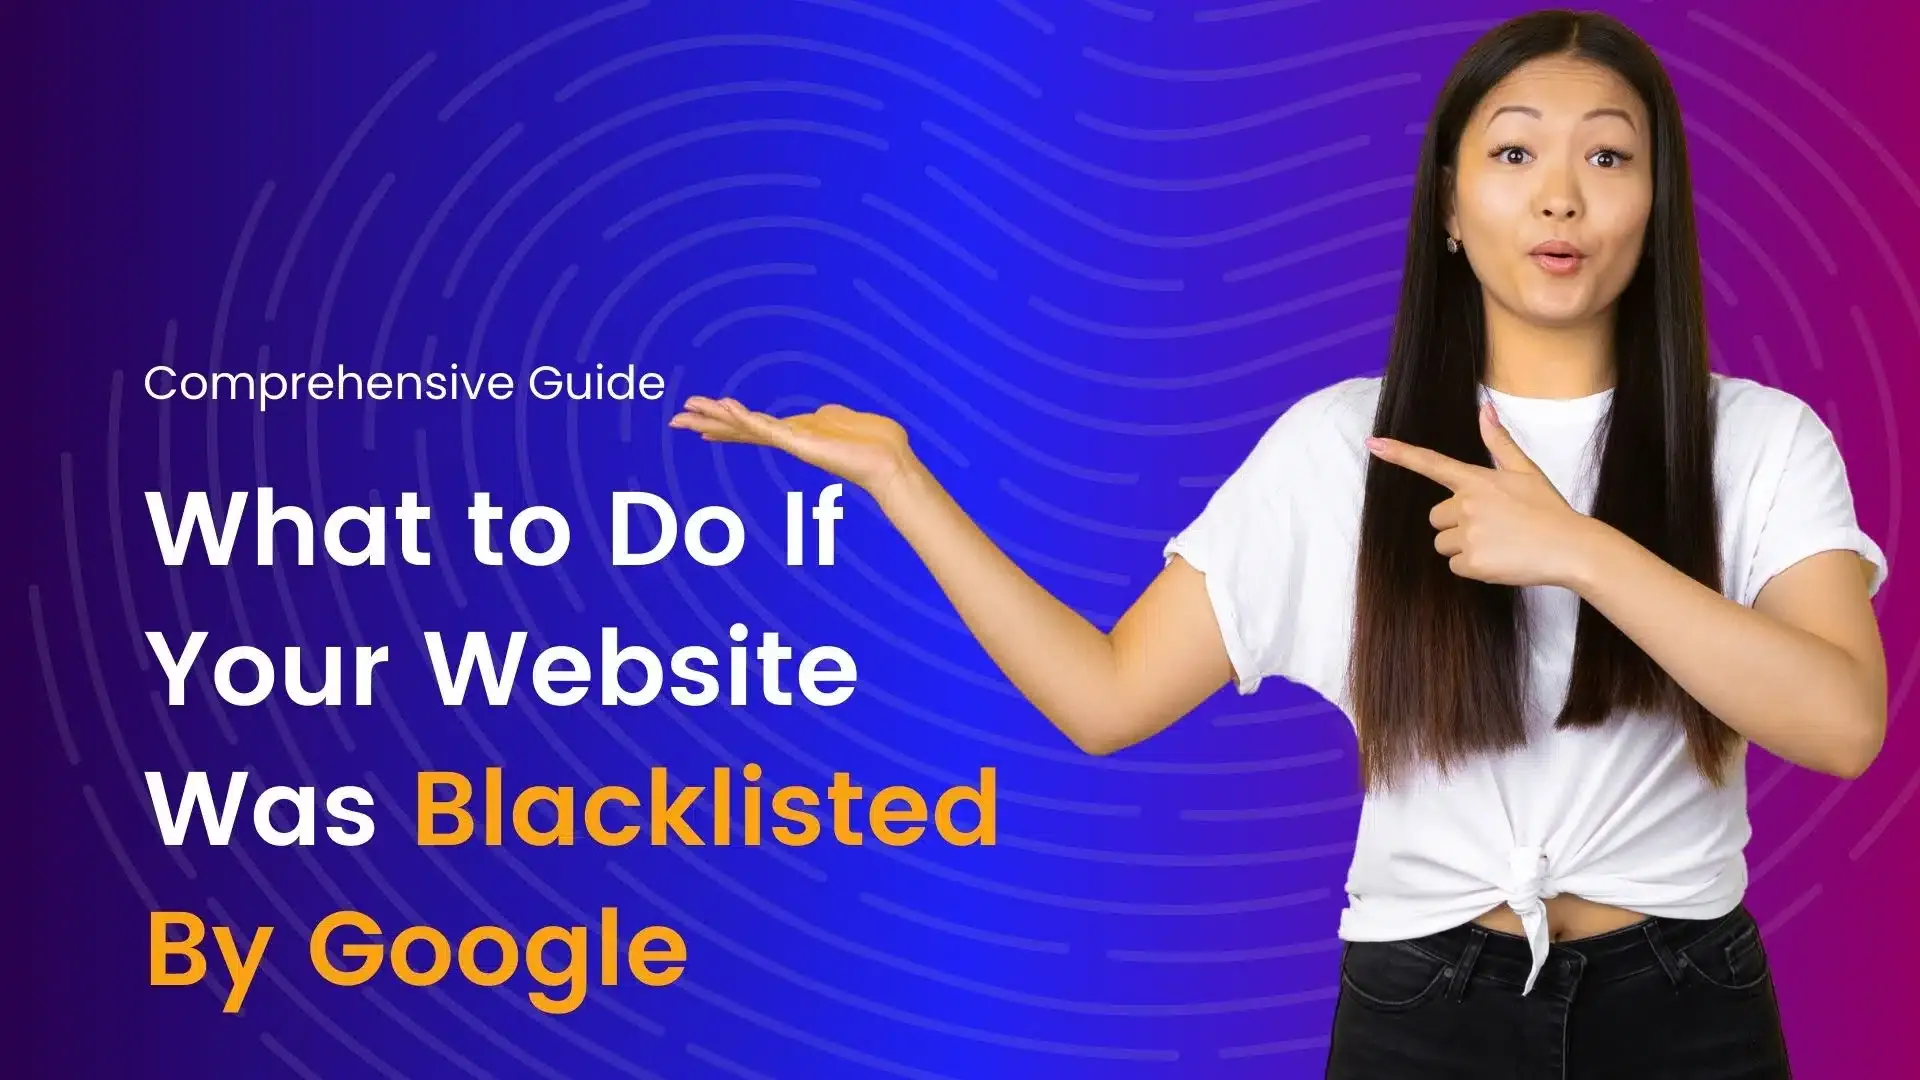 Blacklisted By Google